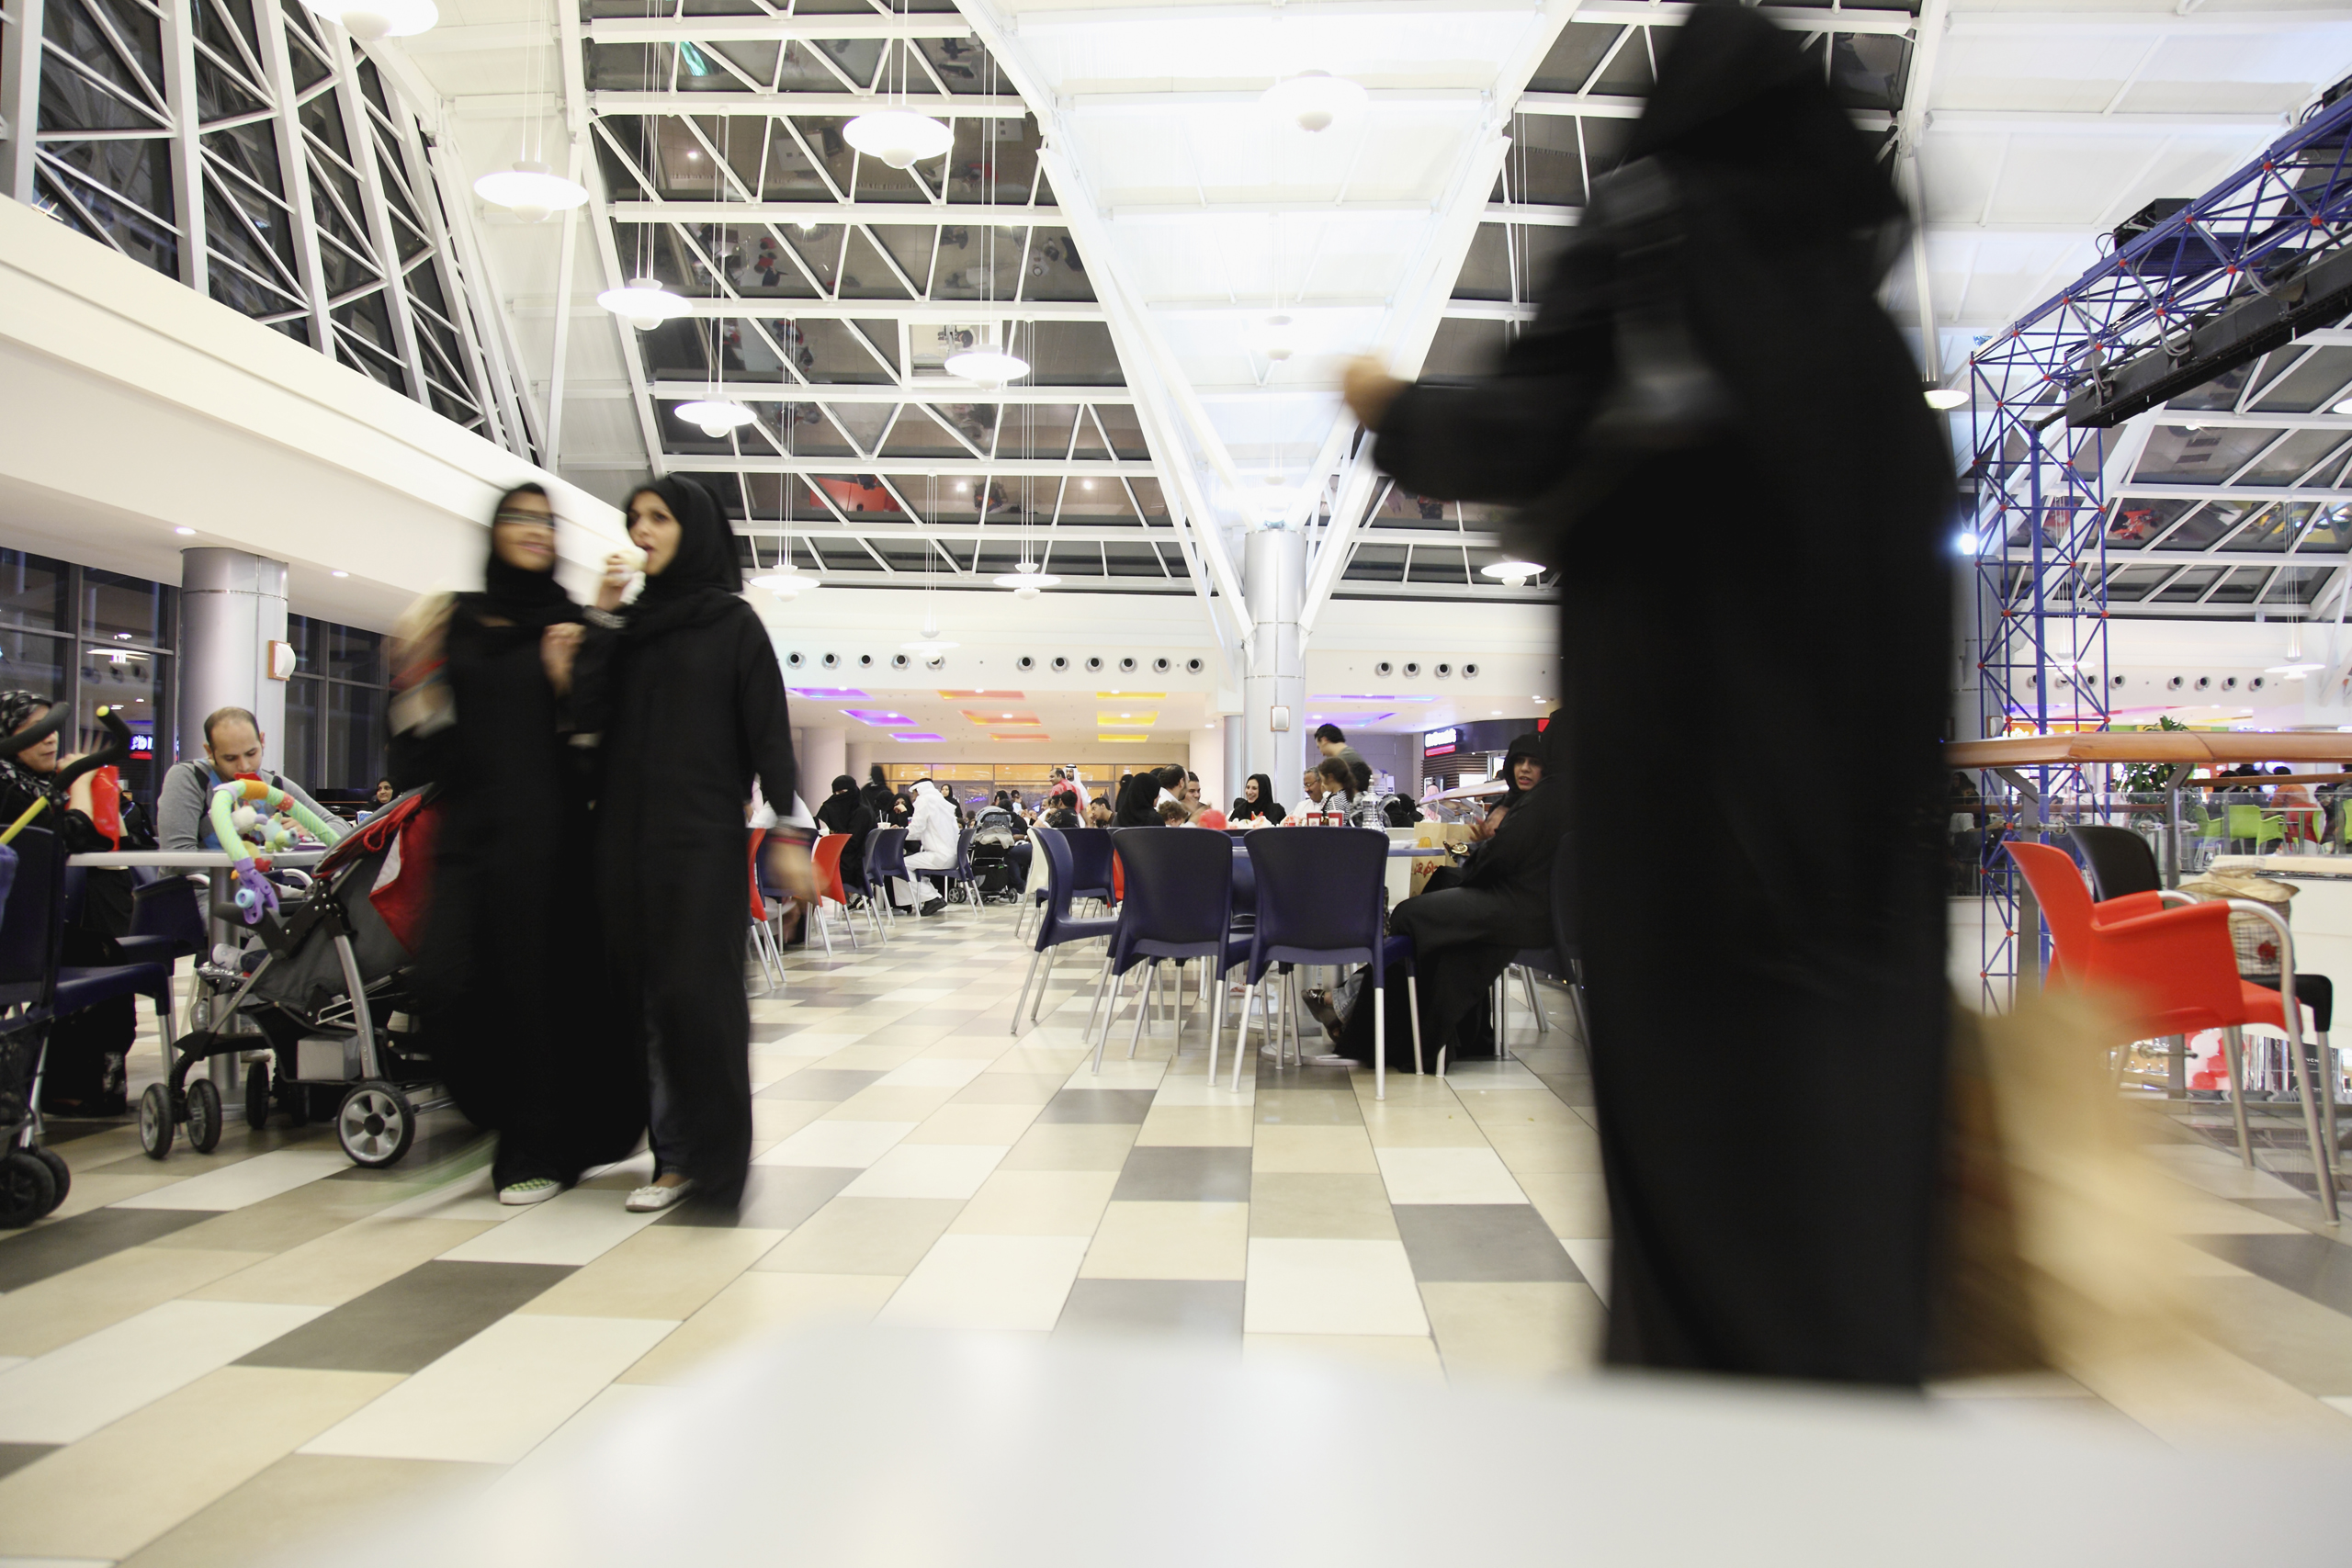 Women in traditional dress shop at a mall Jeddah Saudi Arabia. (Getty Images)